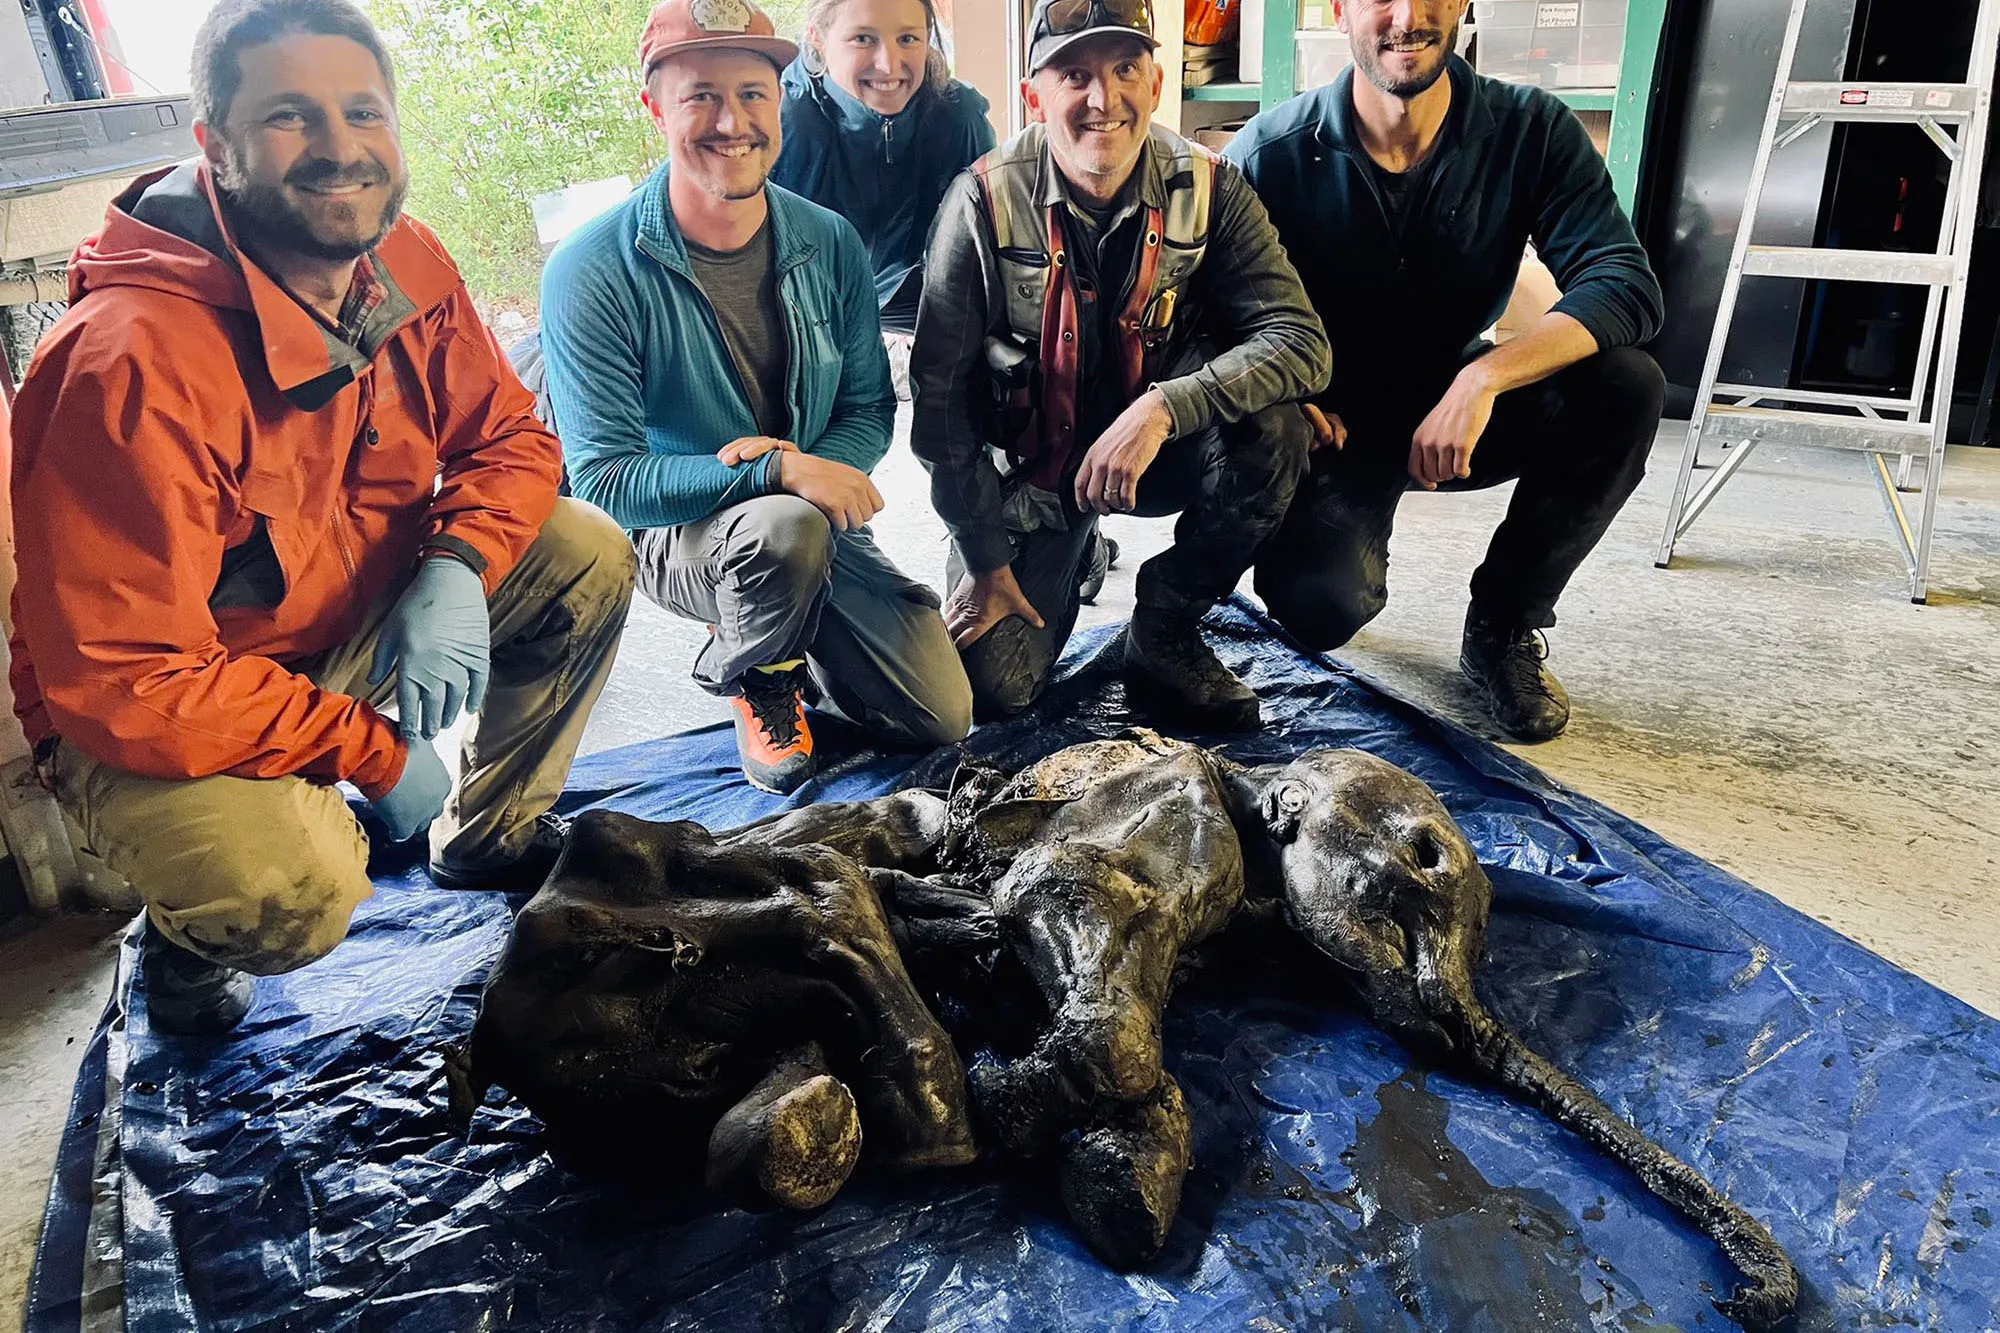 The Remarkable Discovery of a 30,000-Year-Old Baby Mammoth Preserved in Permafrost